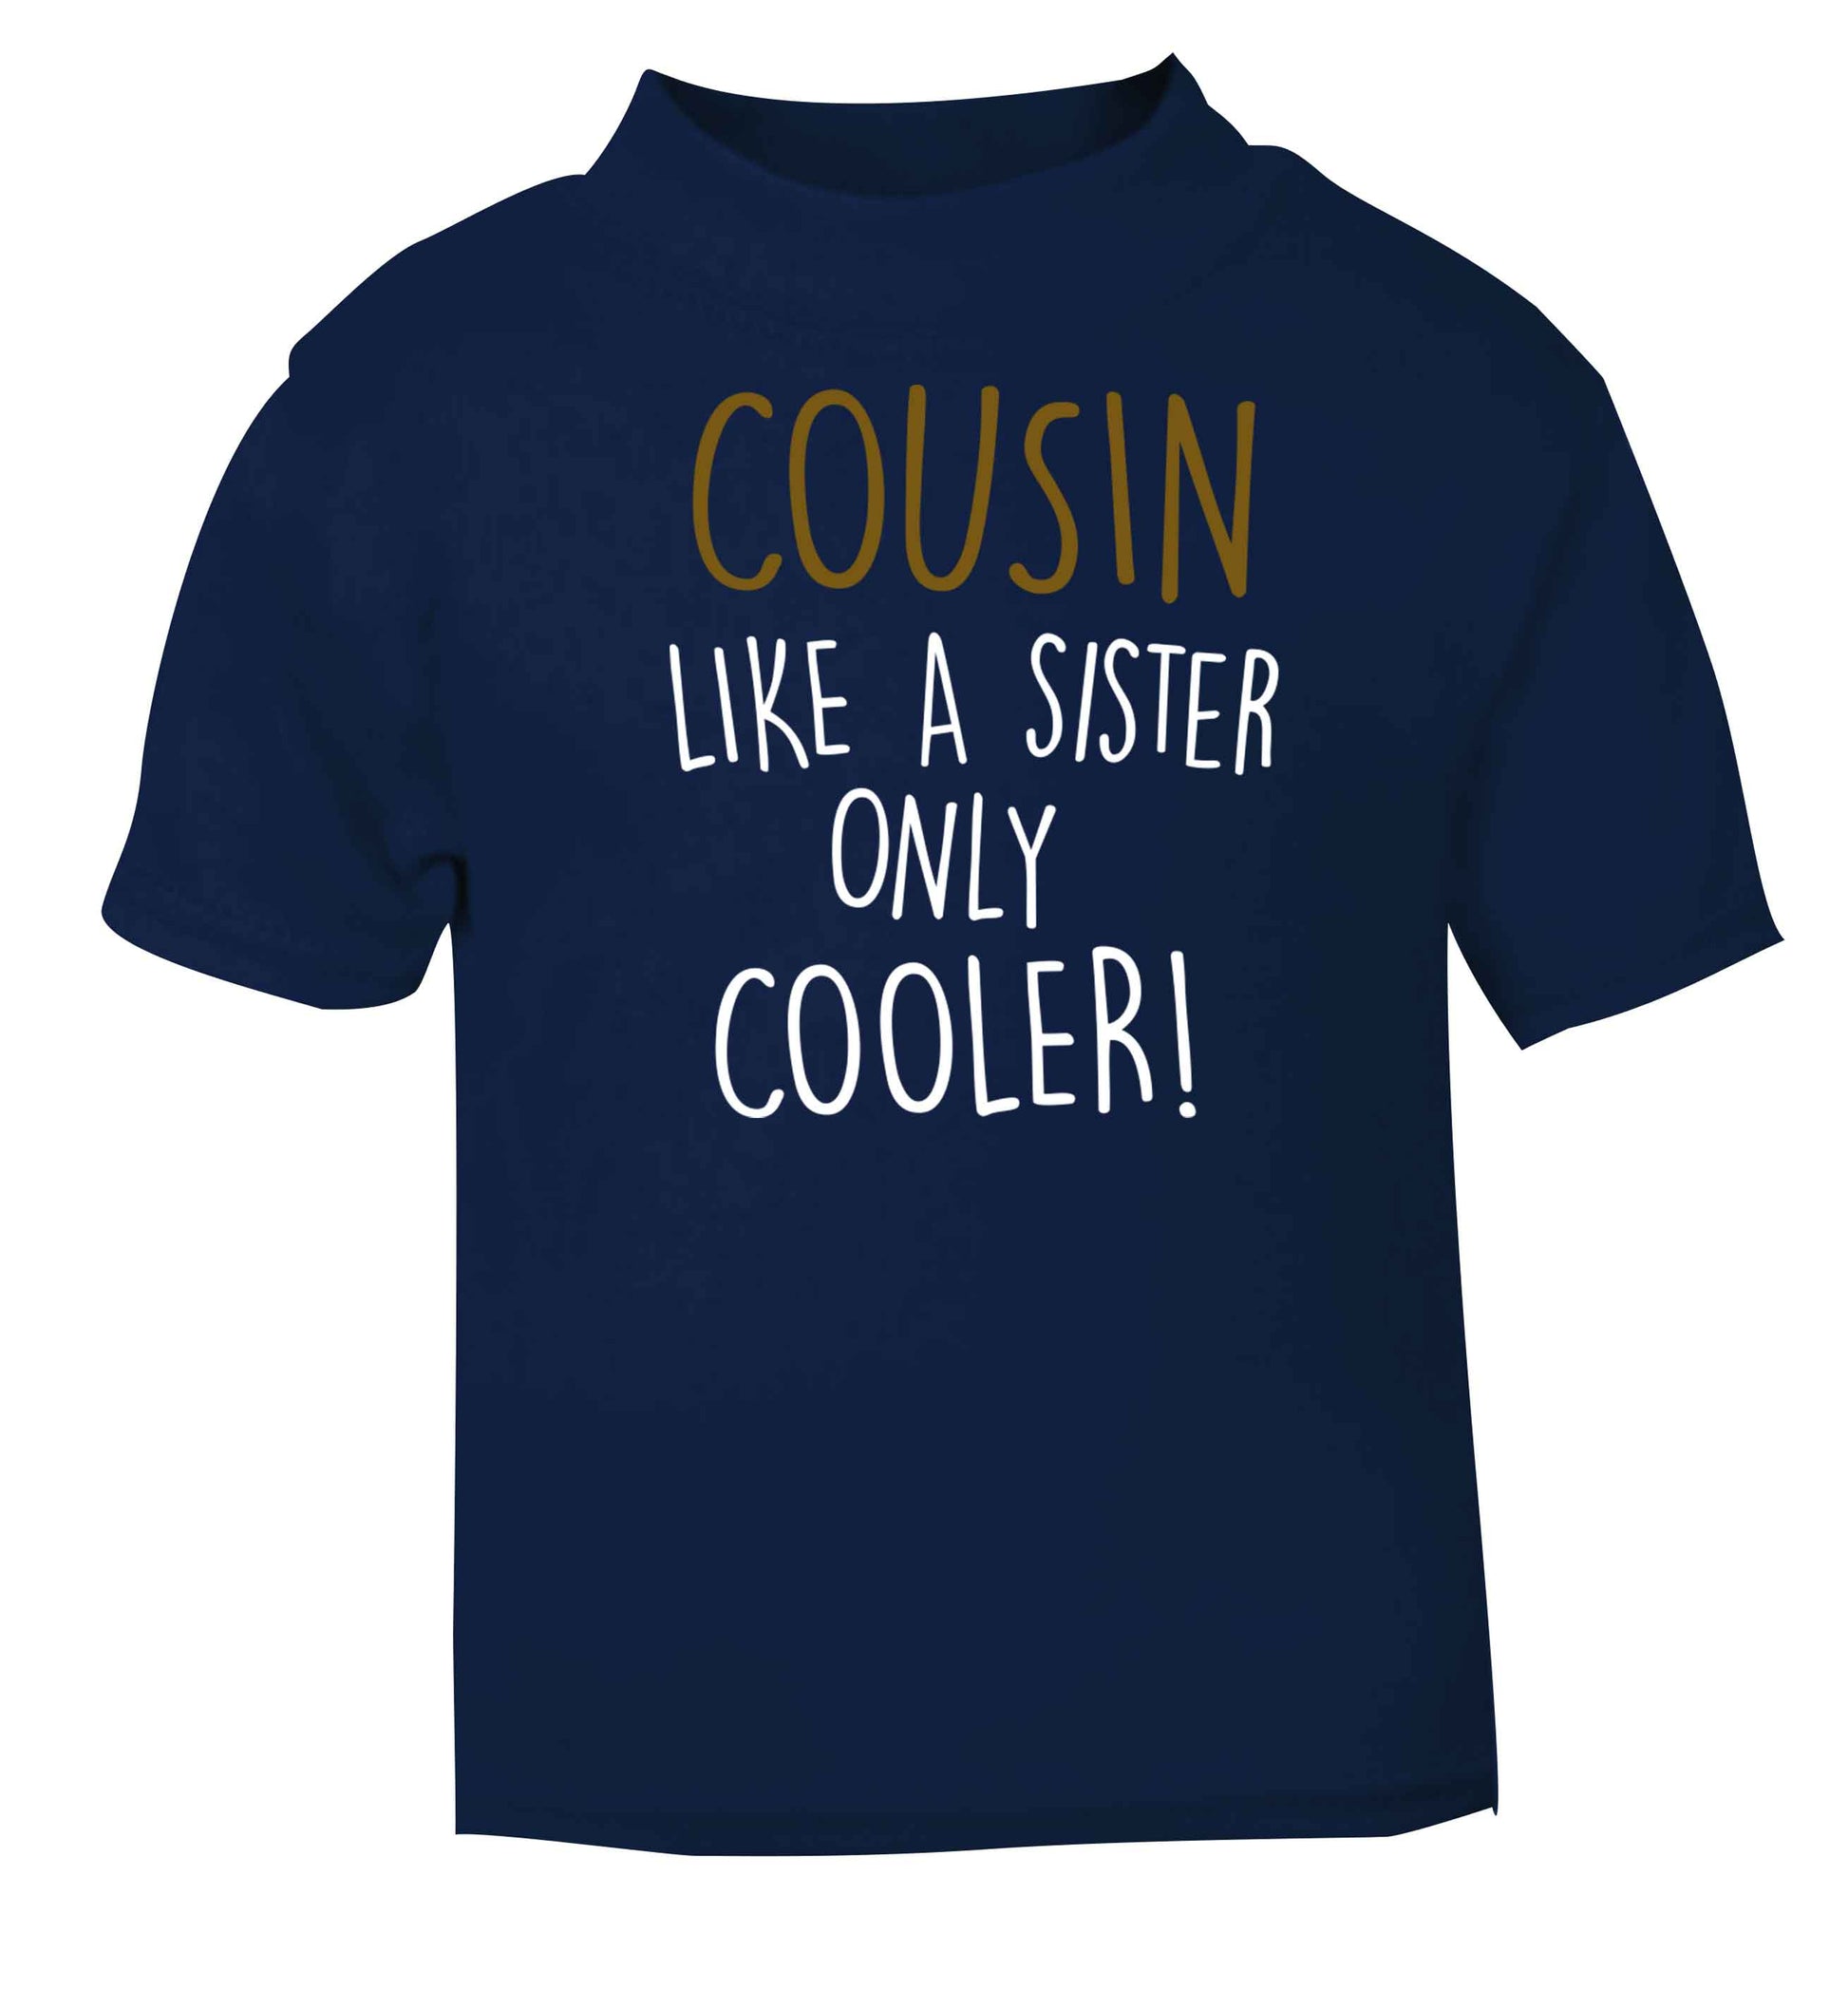 Cousin like a sister only cooler navy baby toddler Tshirt 2 Years